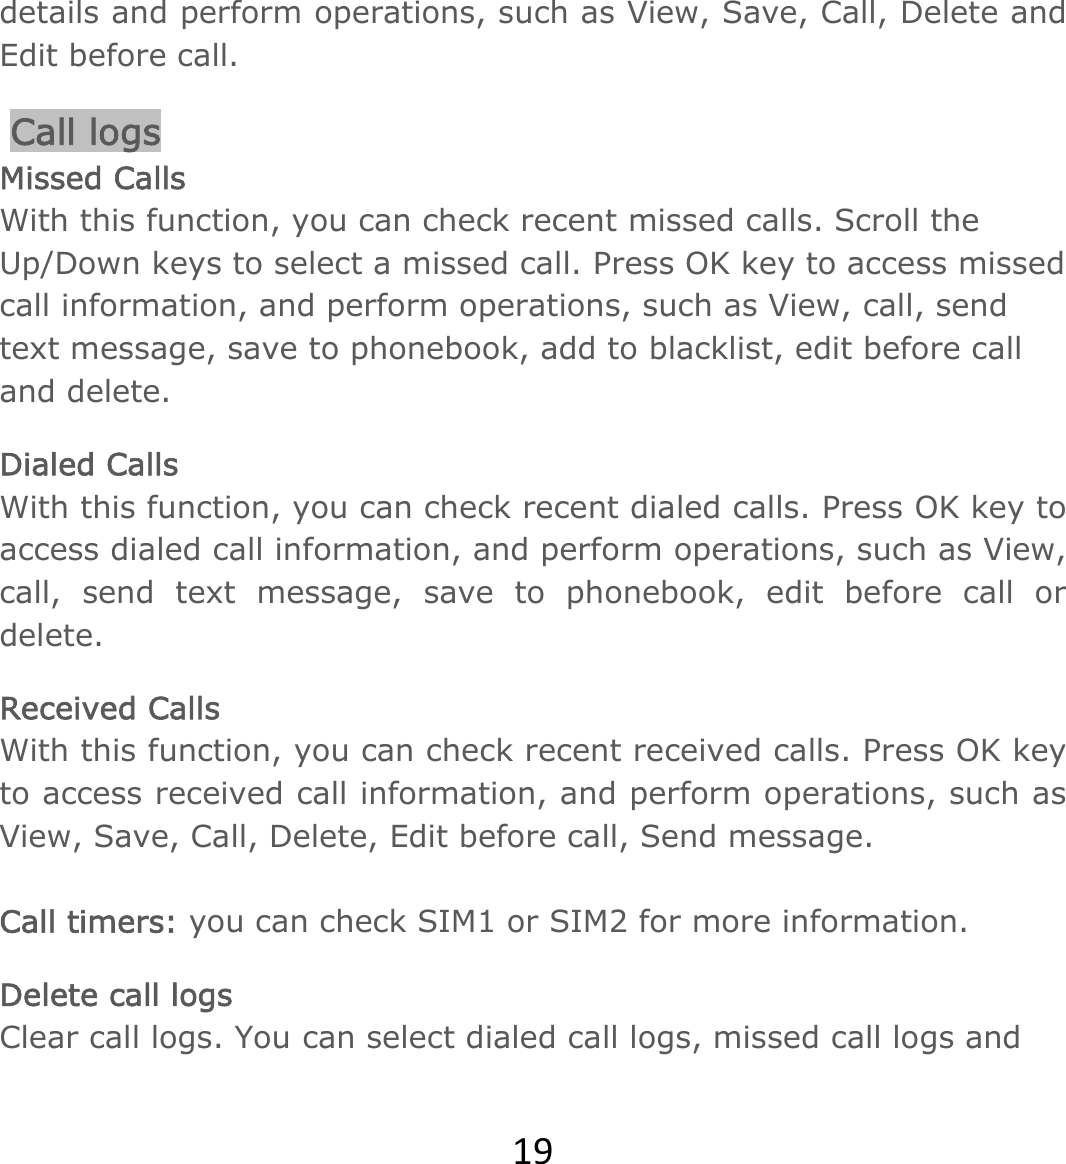 19details and perform operations, such as View, Save, Call, Delete and Edit before call.  Call logs Missed Calls With this function, you can check recent missed calls. Scroll the Up/Down keys to select a missed call. Press OK key to access missed call information, and perform operations, such as View, call, send text message, save to phonebook, add to blacklist, edit before call and delete.  Dialed Calls With this function, you can check recent dialed calls. Press OK key to access dialed call information, and perform operations, such as View, call, send text message, save to phonebook, edit before call or delete.  Received Calls With this function, you can check recent received calls. Press OK key to access received call information, and perform operations, such as View, Save, Call, Delete, Edit before call, Send message.   Call timers: you can check SIM1 or SIM2 for more information. Delete call logs Clear call logs. You can select dialed call logs, missed call logs and 